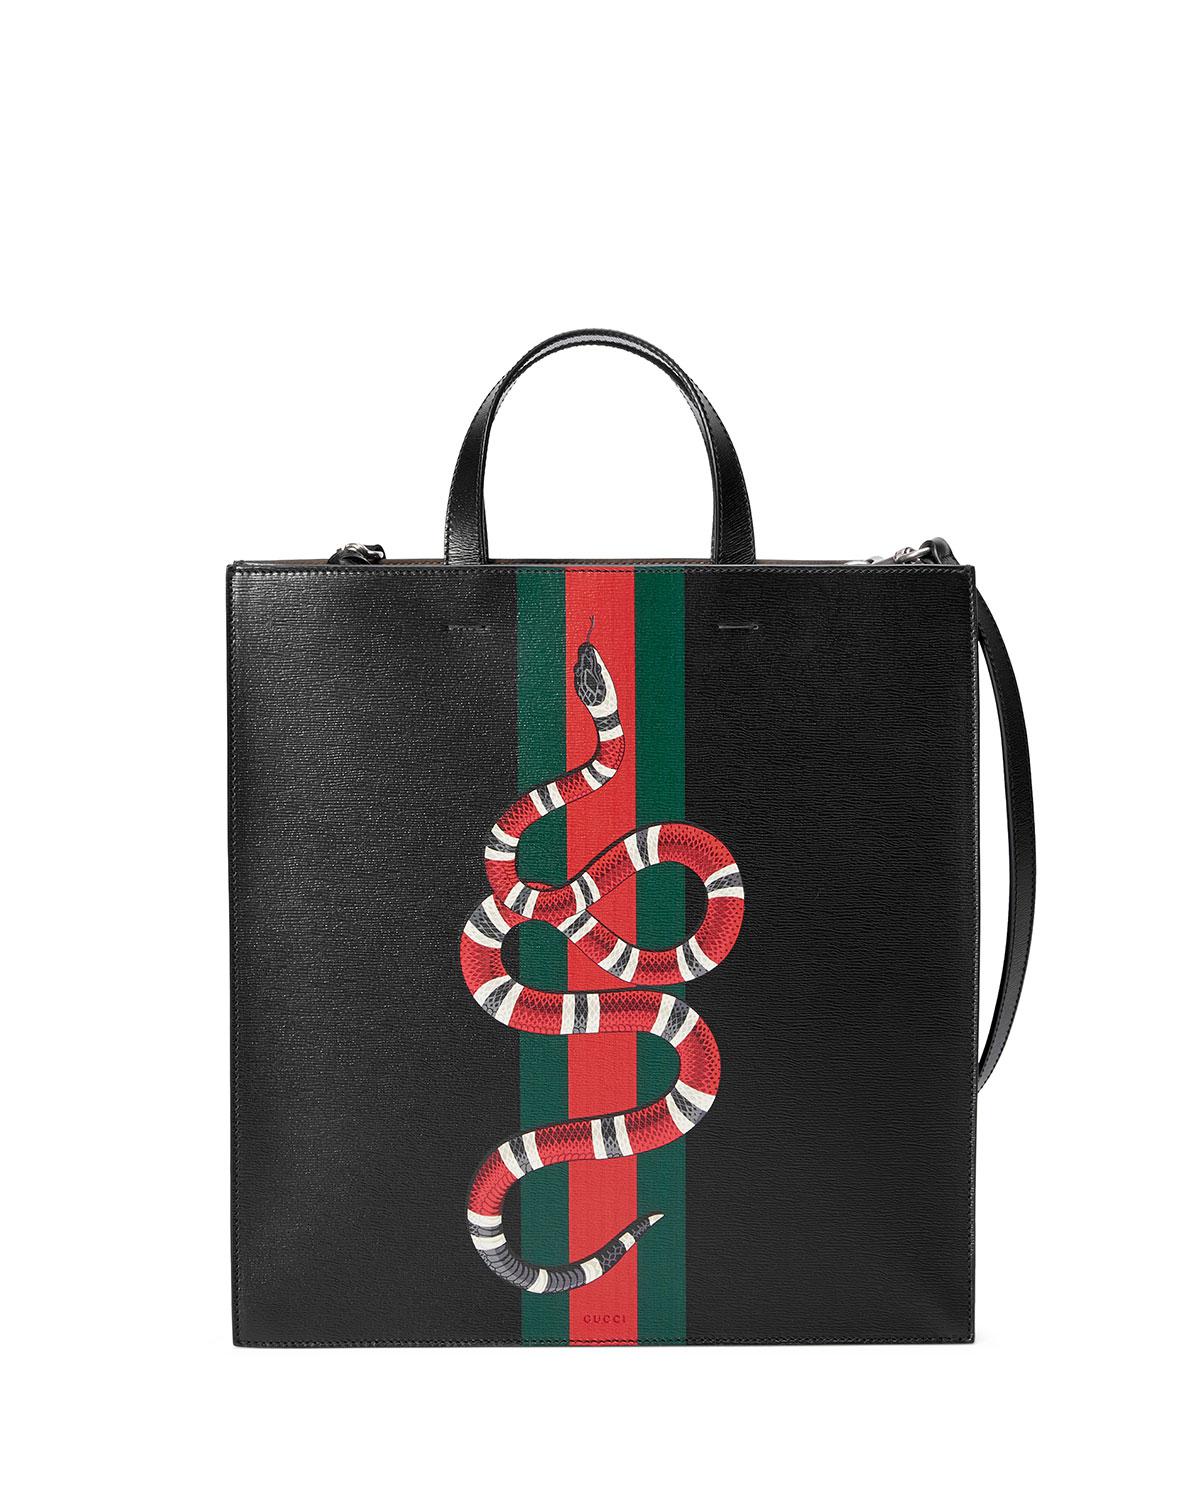 Gucci Web & Snake Leather Tote Bag in Black - Lyst